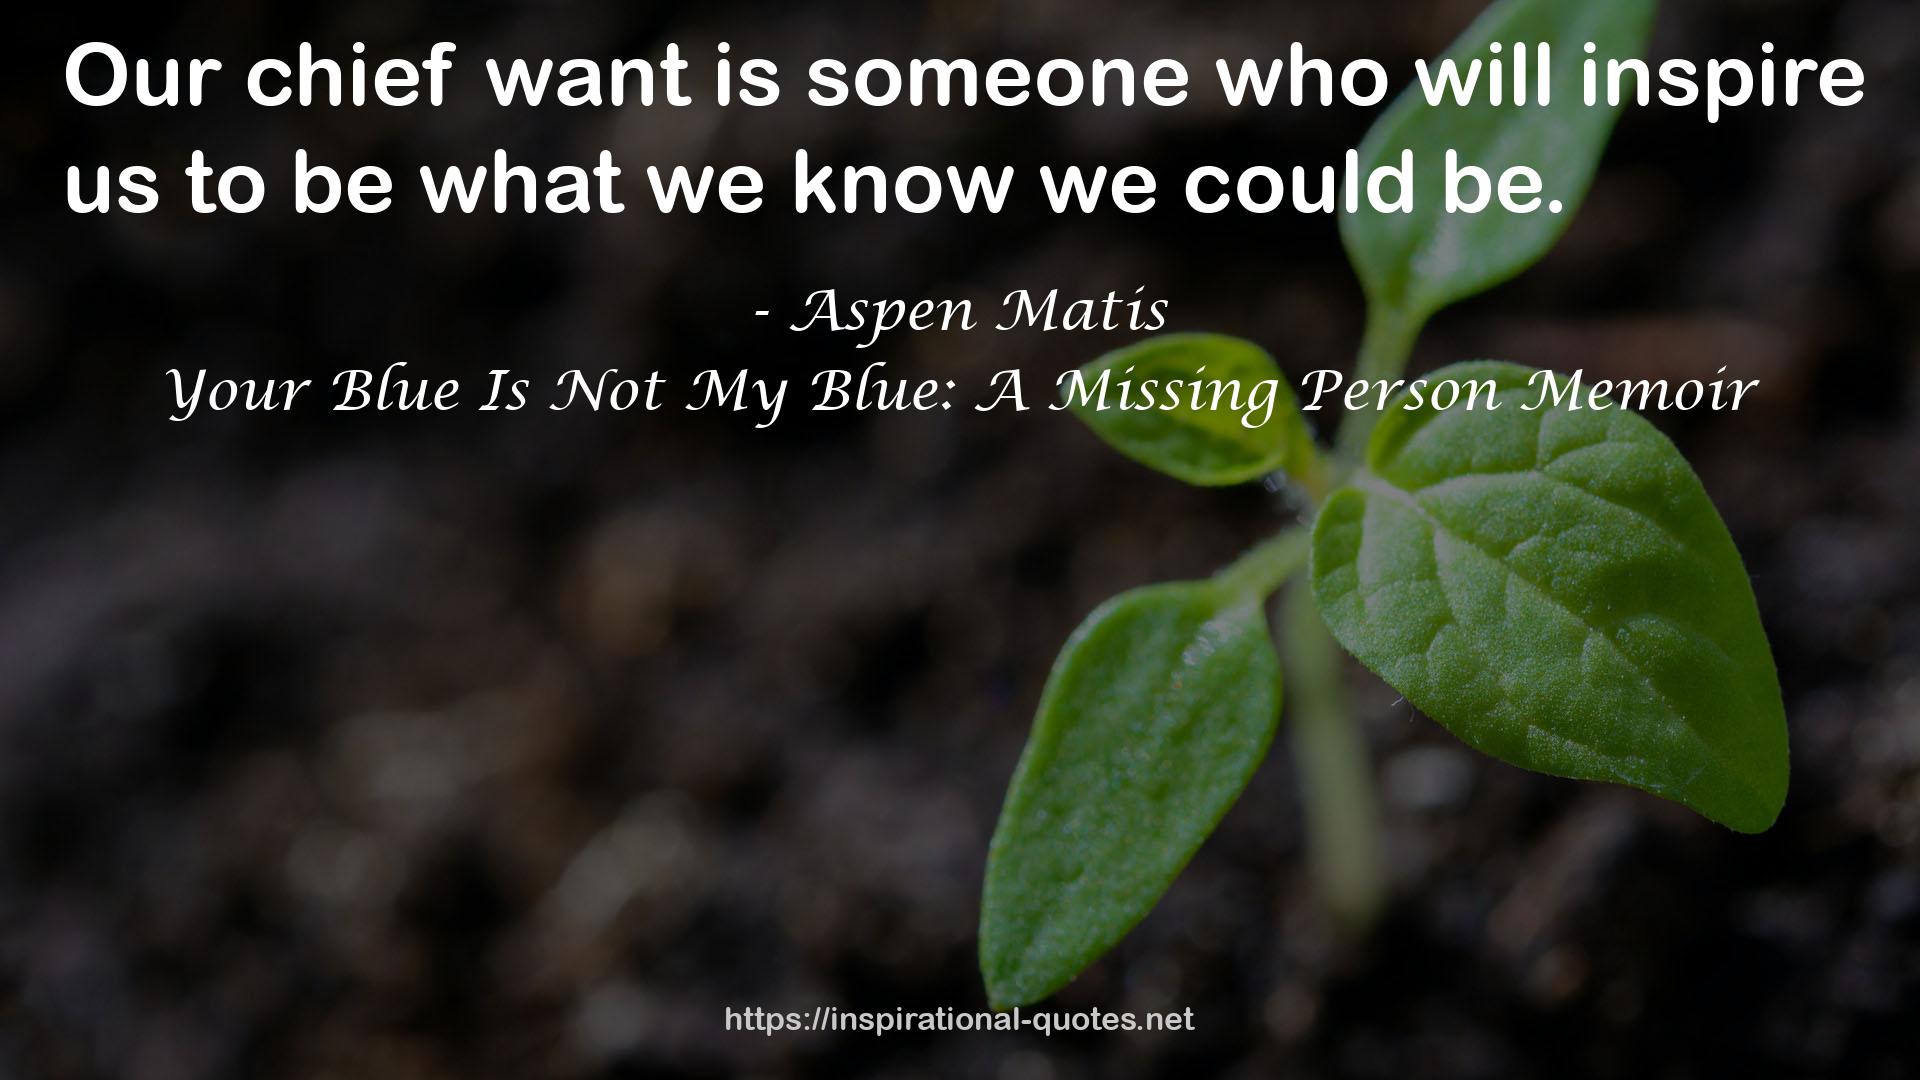 Your Blue Is Not My Blue: A Missing Person Memoir QUOTES